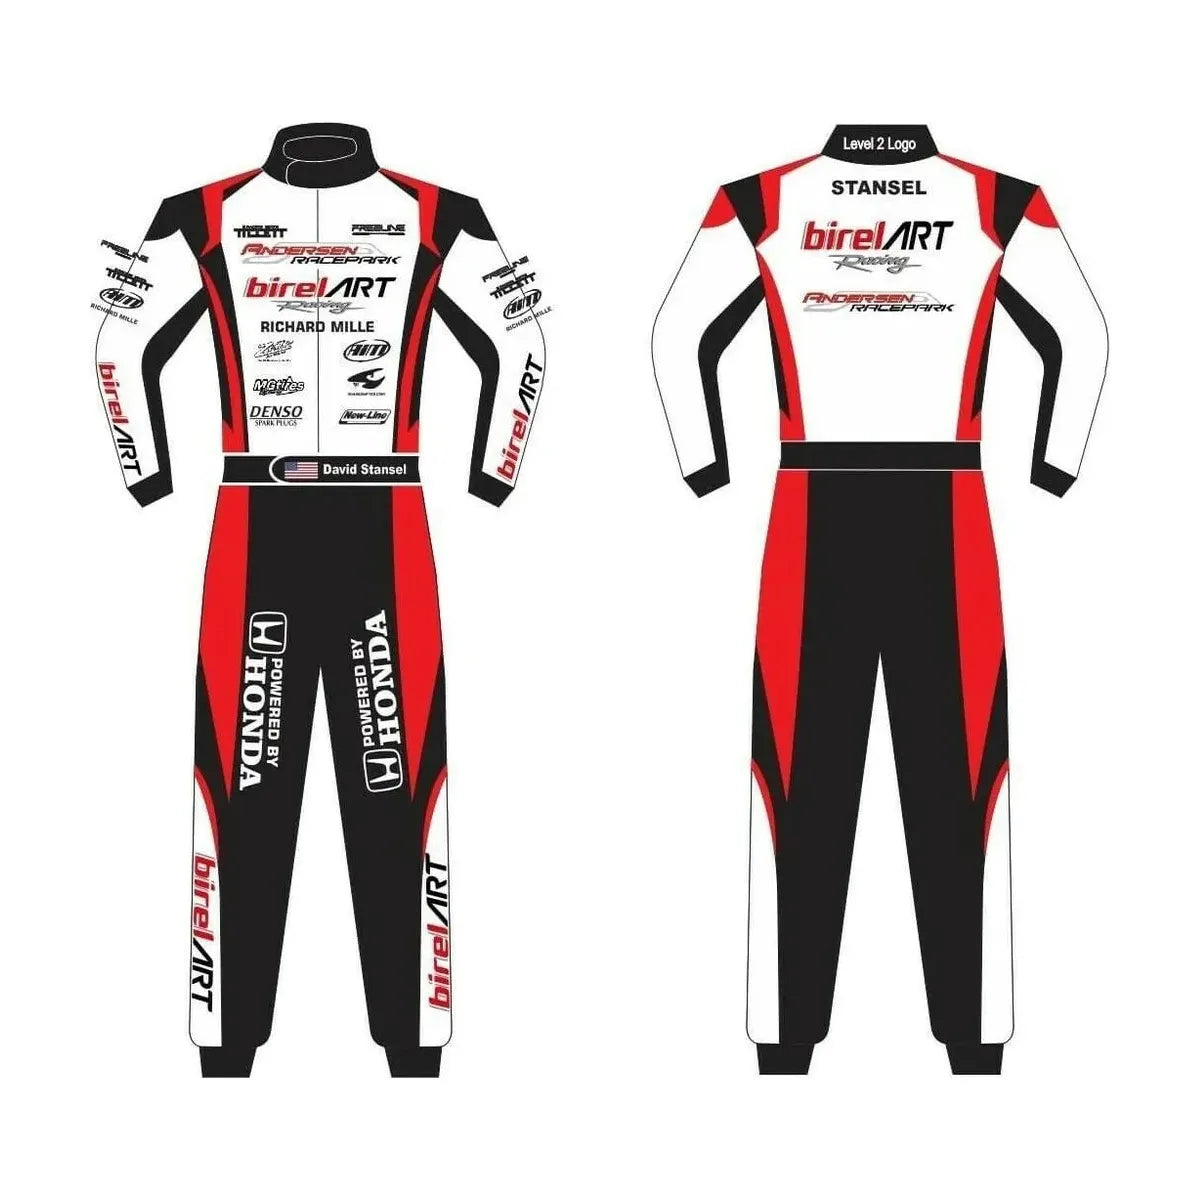 kart racing Sublimation Protective clothing Racing gear Suit N-0222